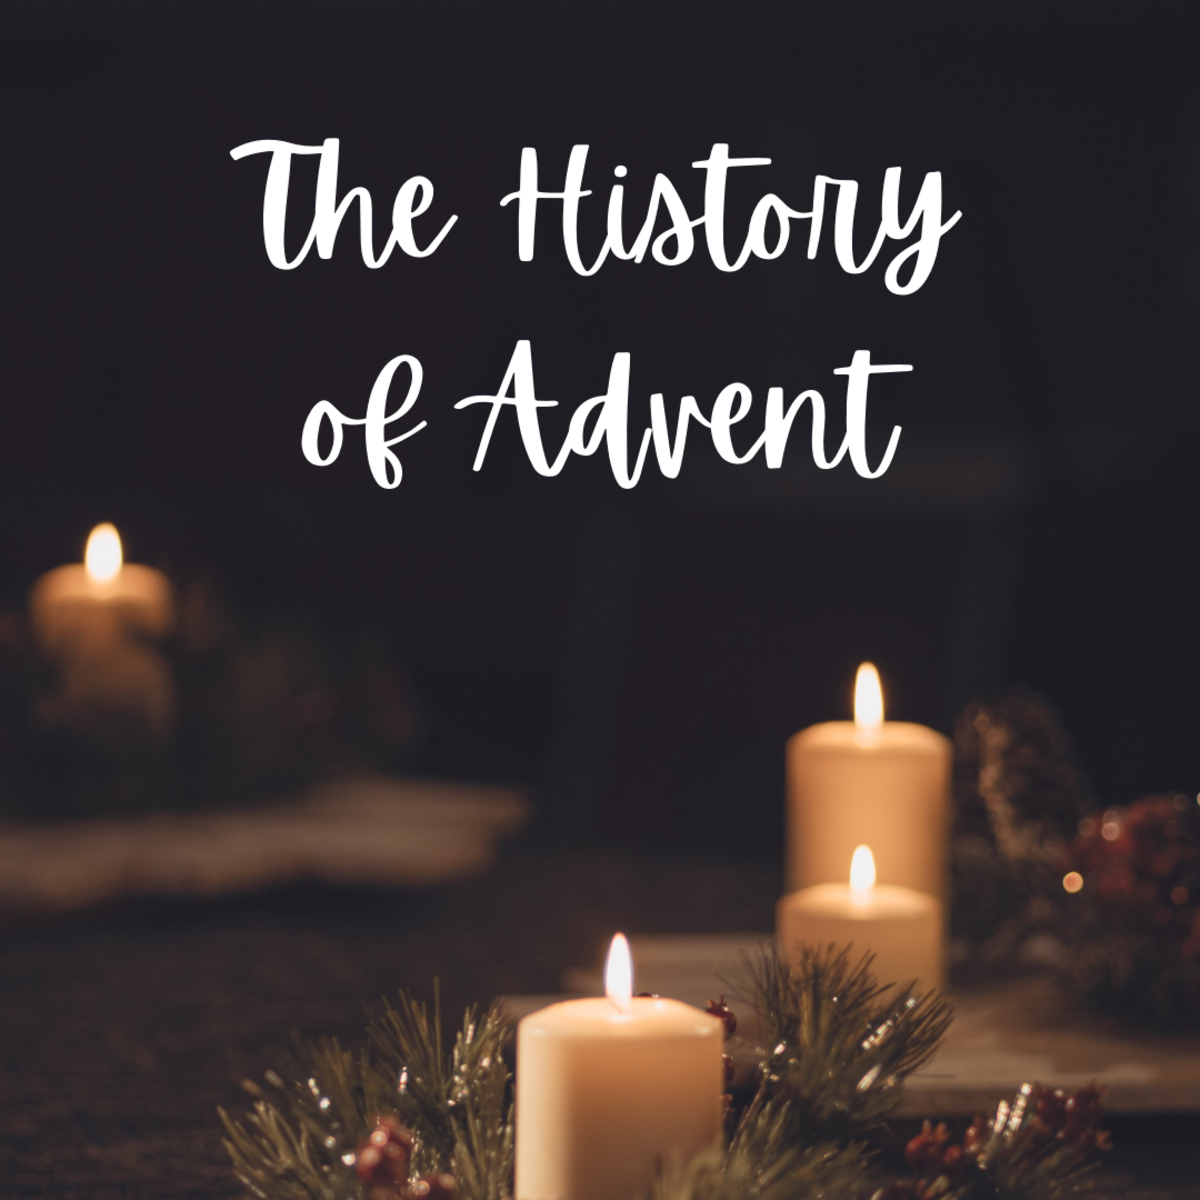 Read on to learn about the history and origins of Advent, its symbolic meaning, as well as the origins and meaning of the Advent wreath